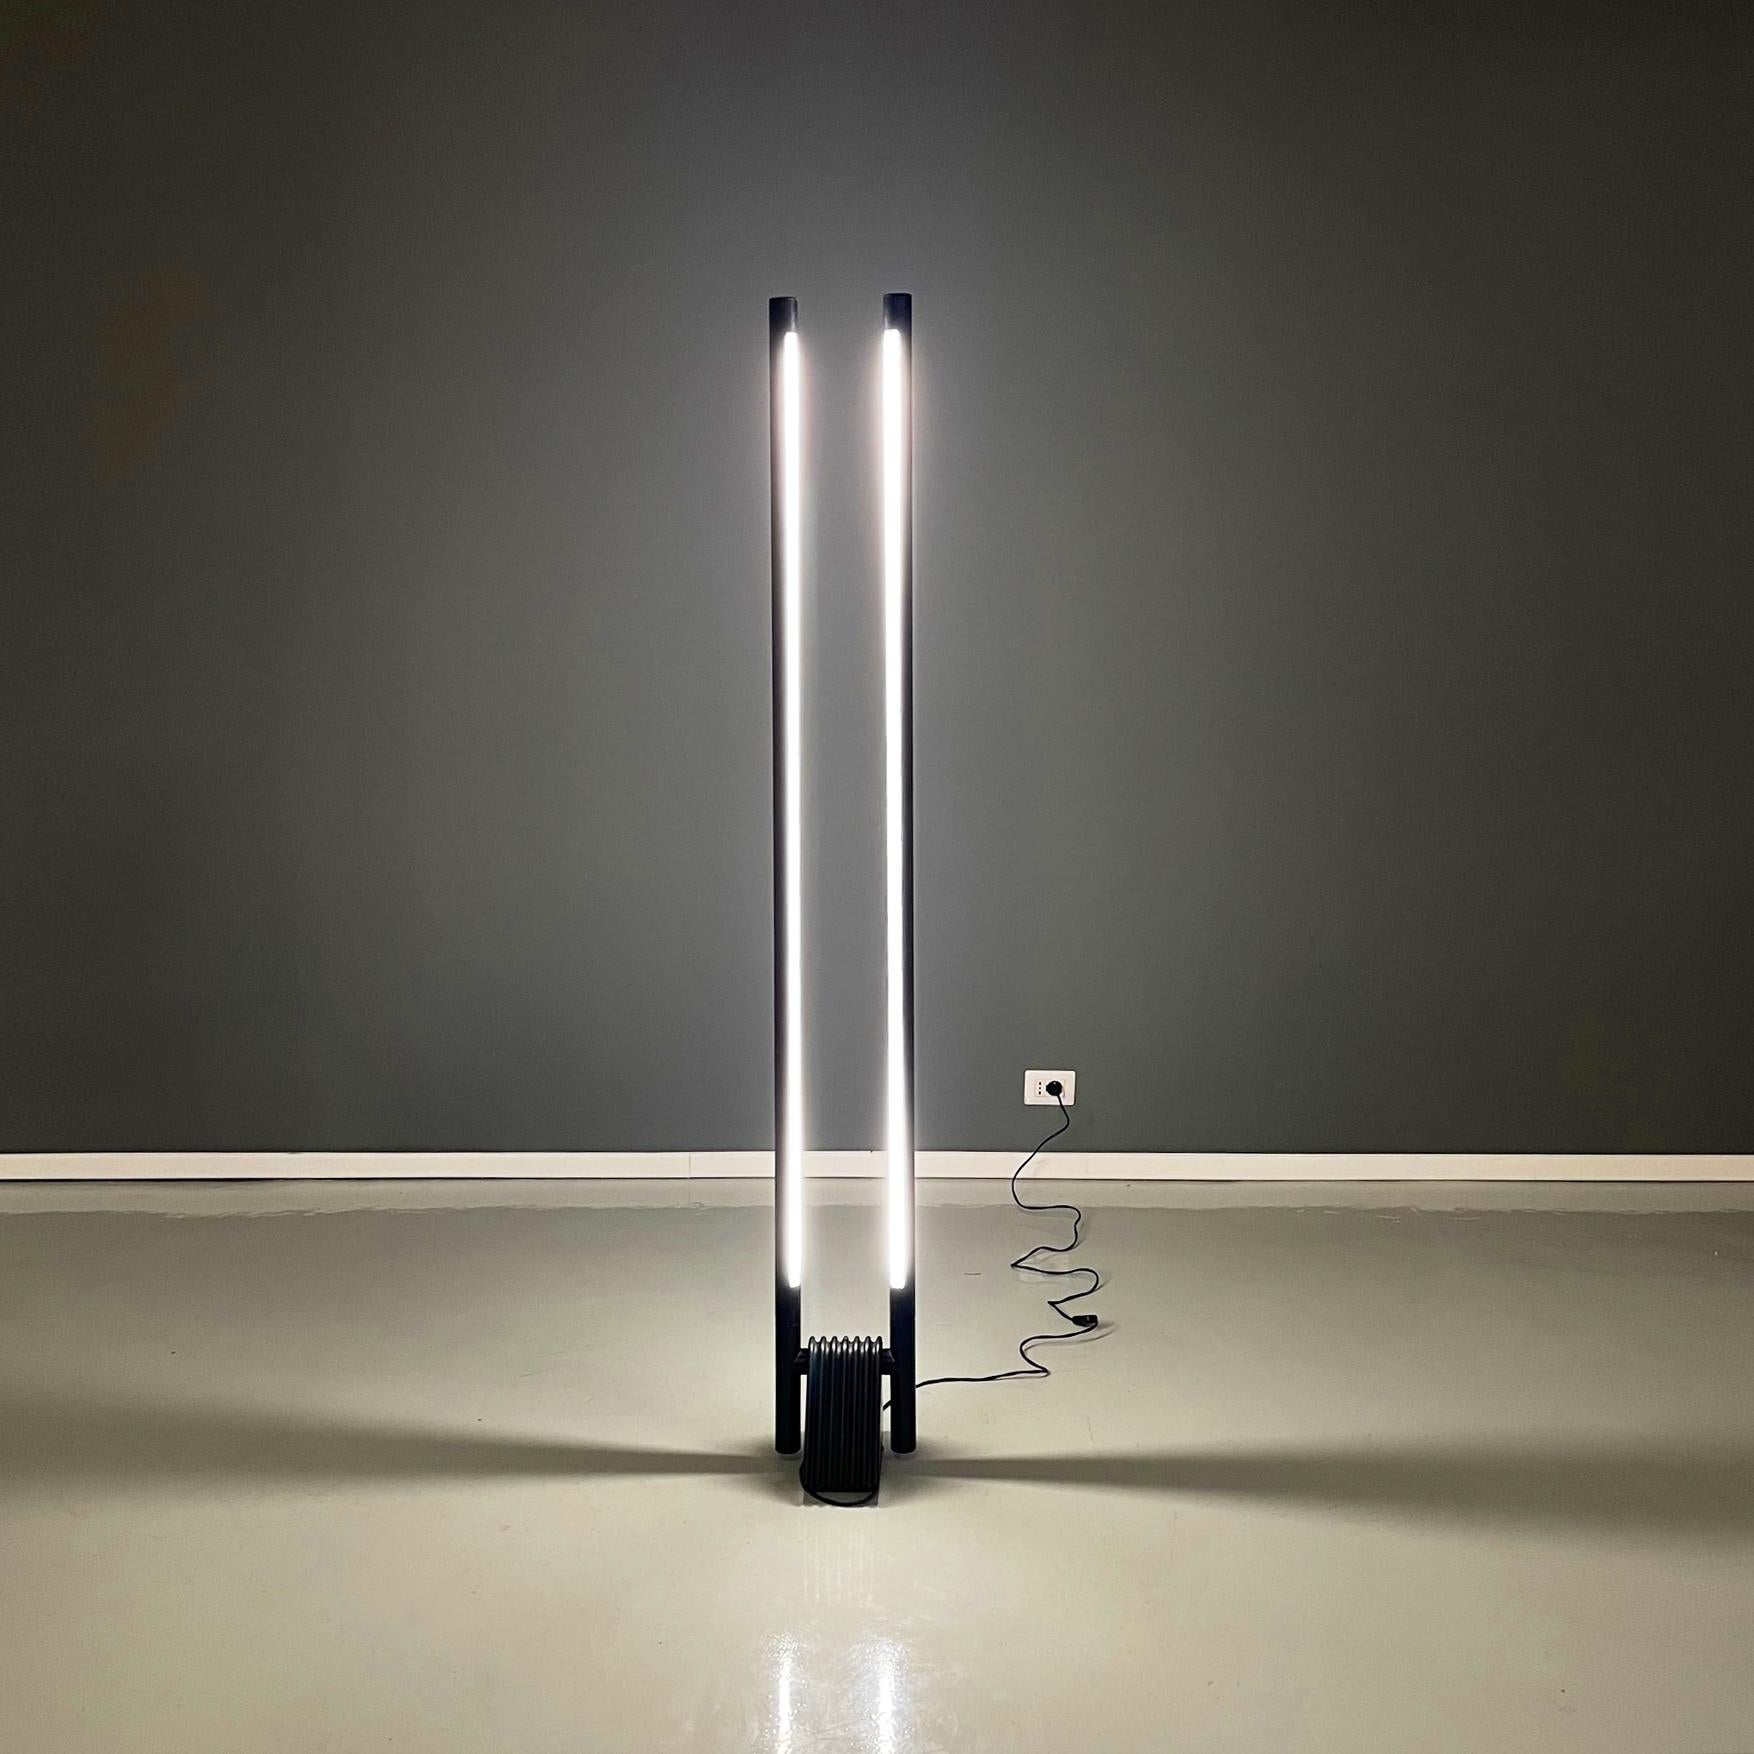 Italian Modern Adjustable Floor Lamp Sistema Flu by R. Bonetto for Luci, 1980s In Good Condition For Sale In MIlano, IT